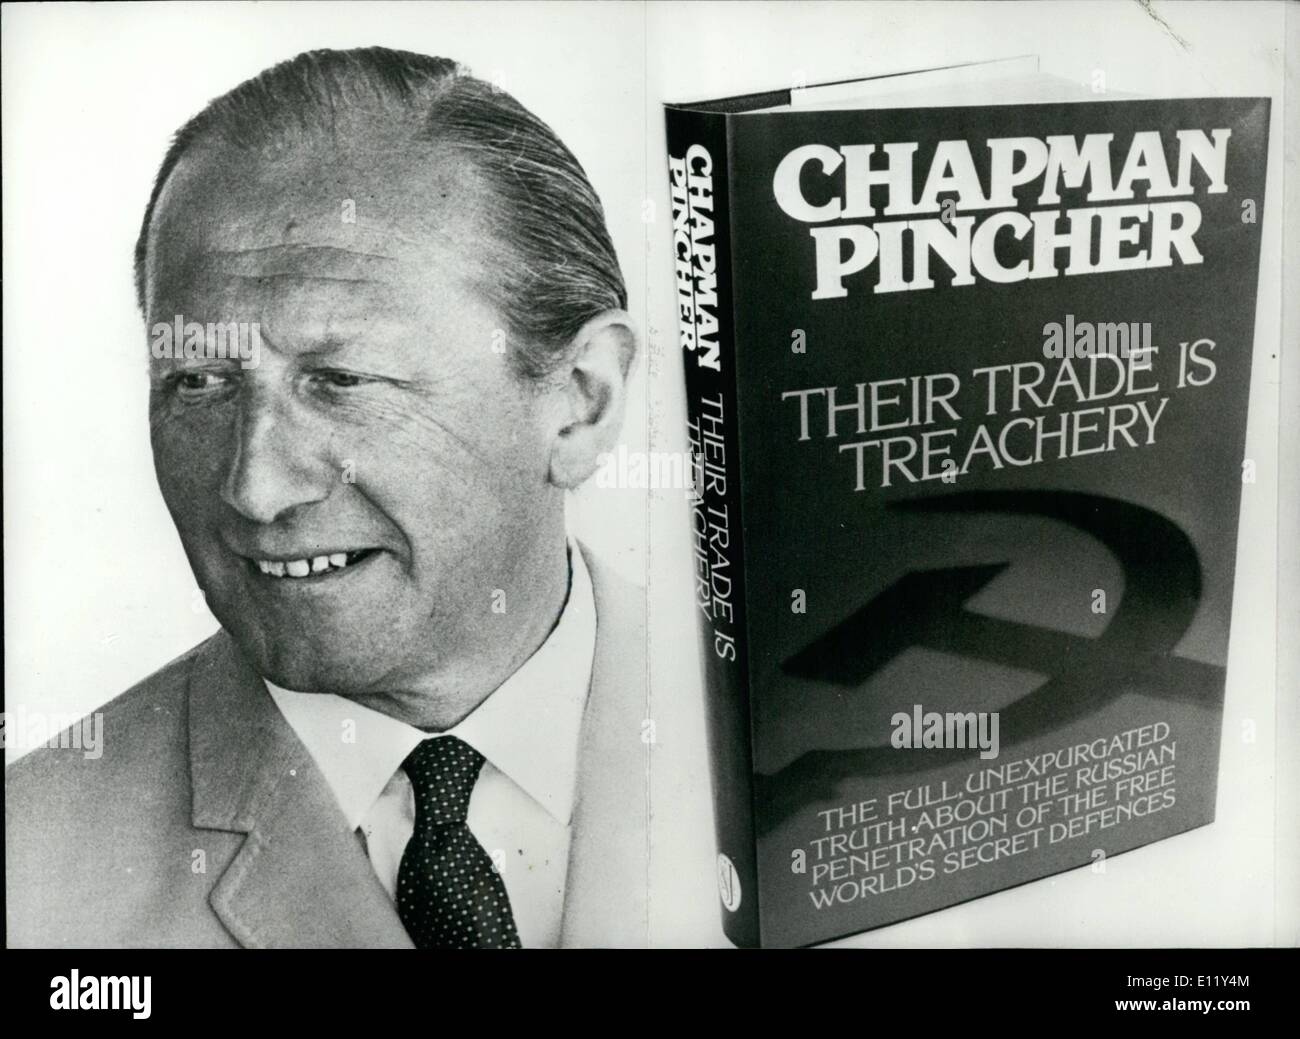 Mar. 03, 1981 - Pincher Names Driberg As Double Agent: Tom Driberg, the left wing Labour M.P. was a double agent working for the KGB and MI5, according to Chapman Pincher in his new book ''Their Trade is Treachery'' published this week. Driberg, who died in 1976, was a member of the Labour National Executive, chairman of the Labour Party and finally a life peer.Photo shows Author Chapman Pincher, a leading expert on espionage, and his controversial new book ''Their Trade is Treachery' Stock Photo